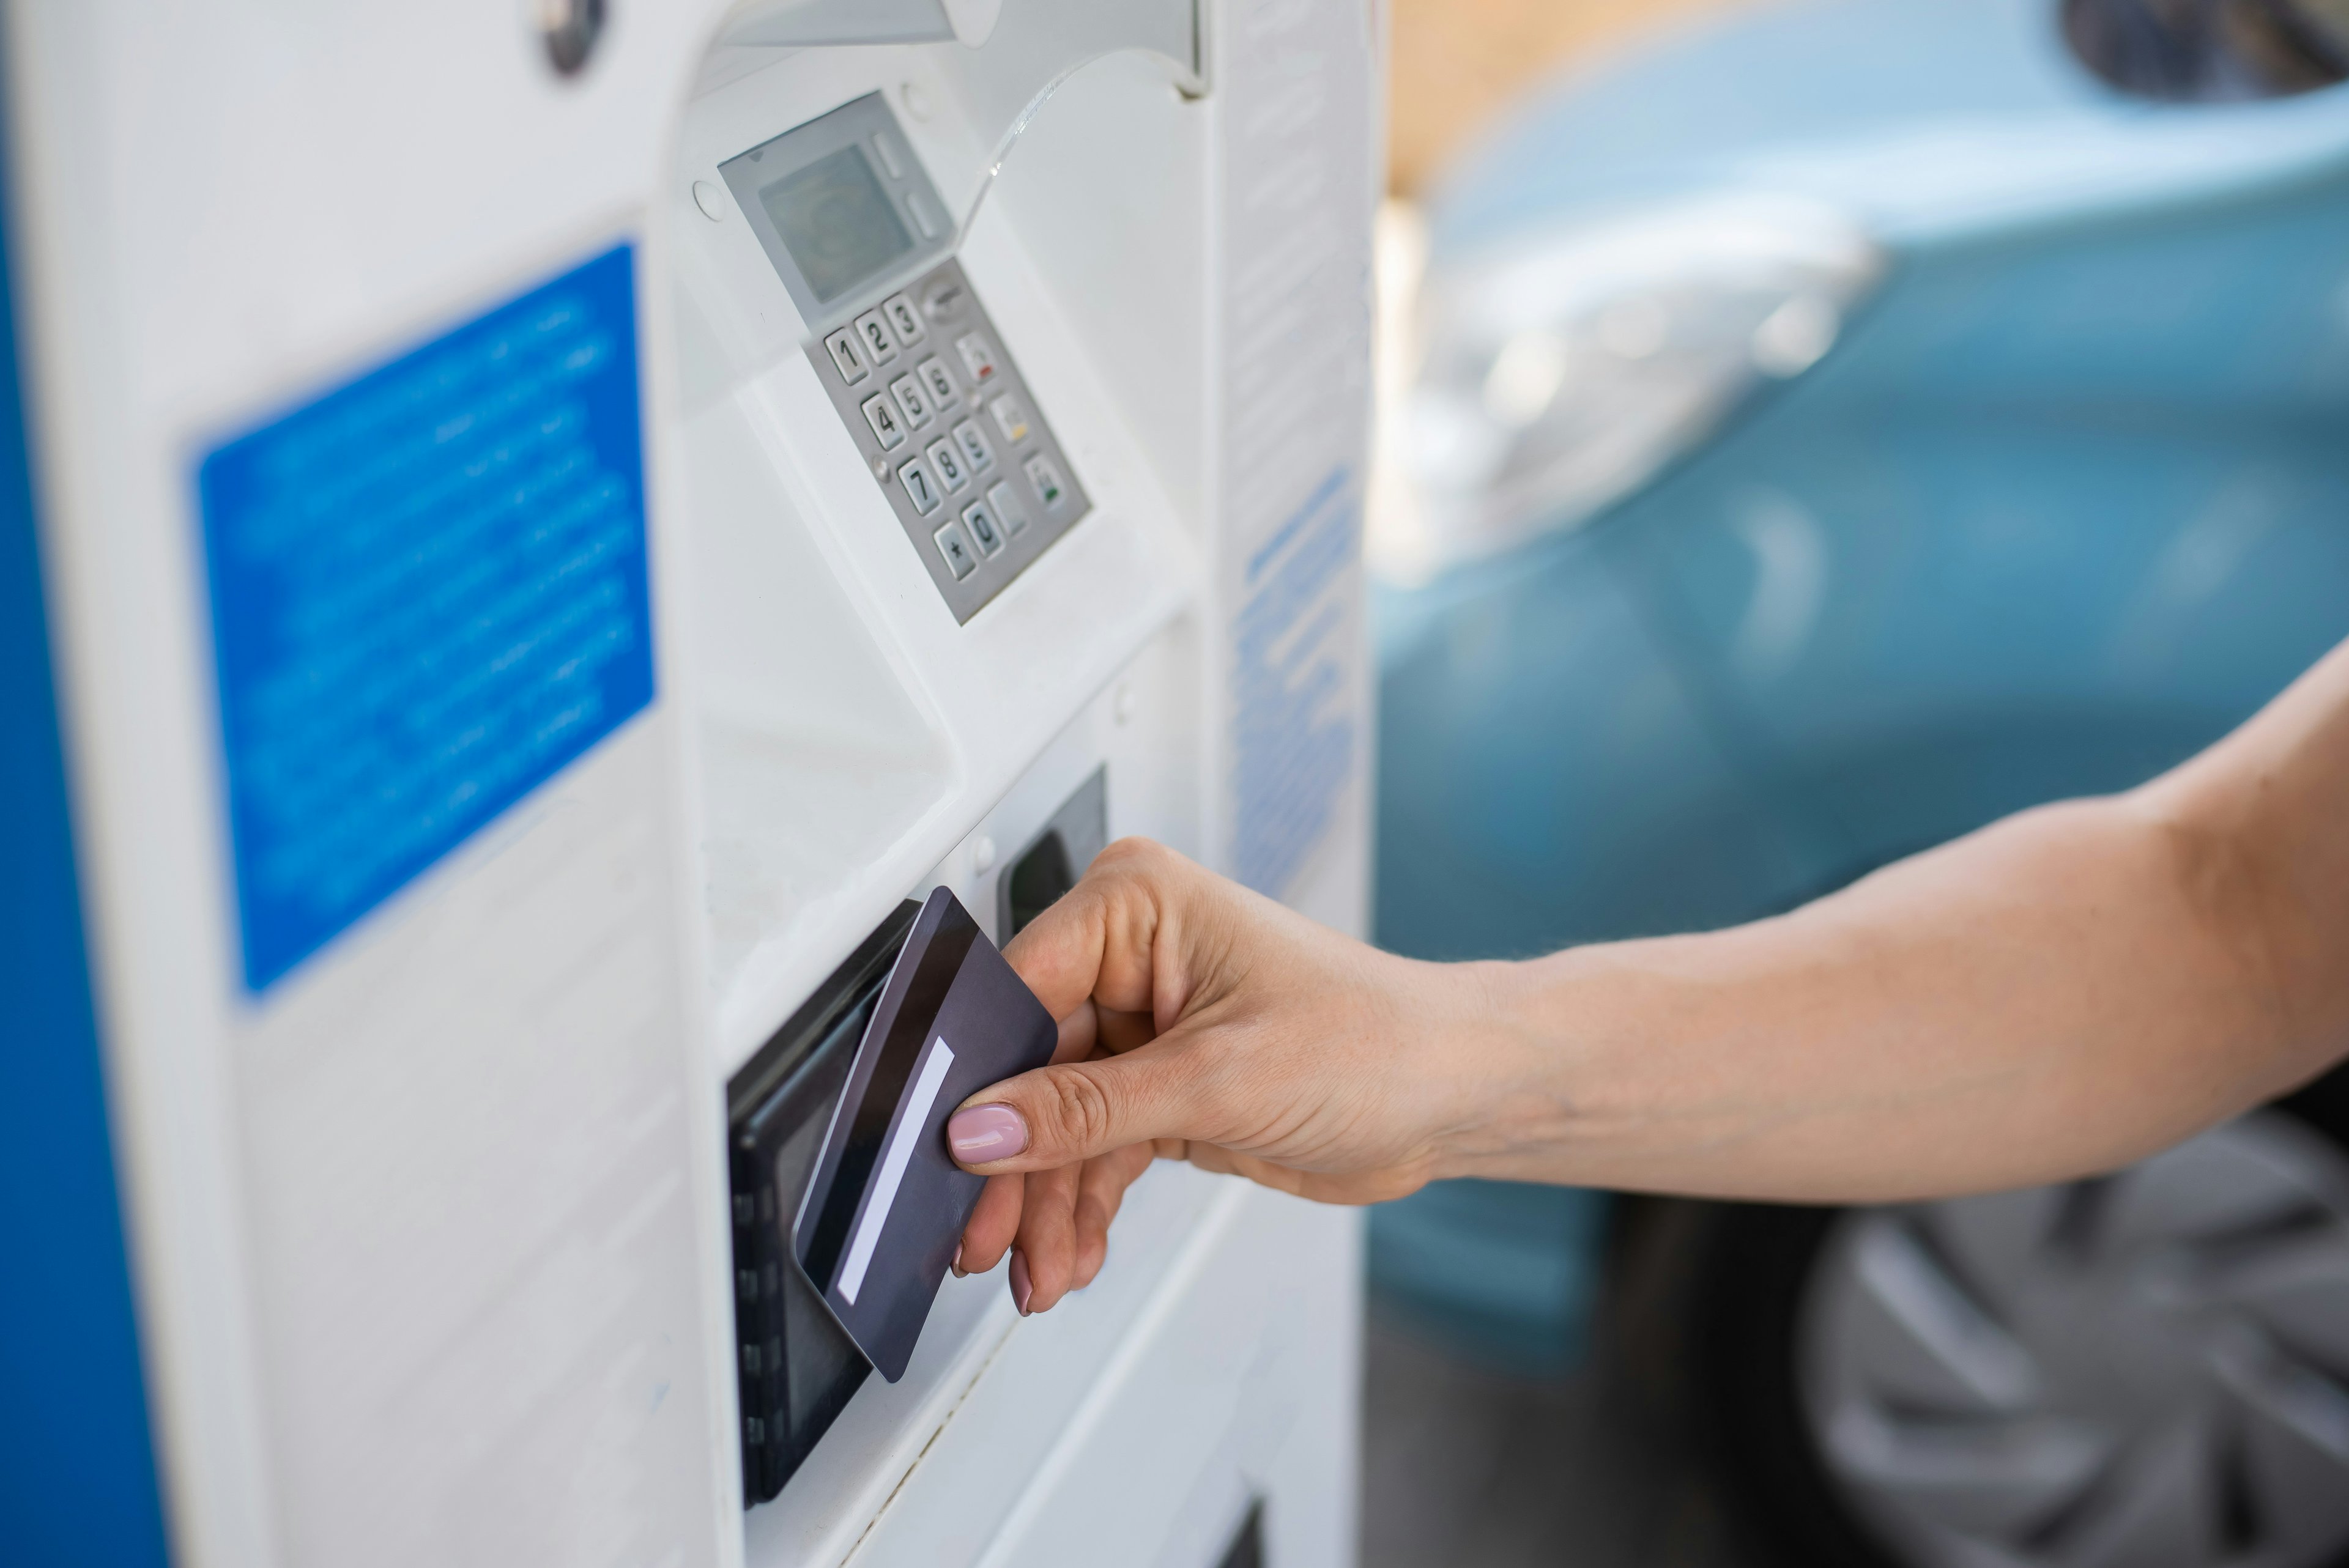 A Woman Fills Her Car With Gasoline At A Self Service Gas Station And Pays With A Credit Card At A Machine